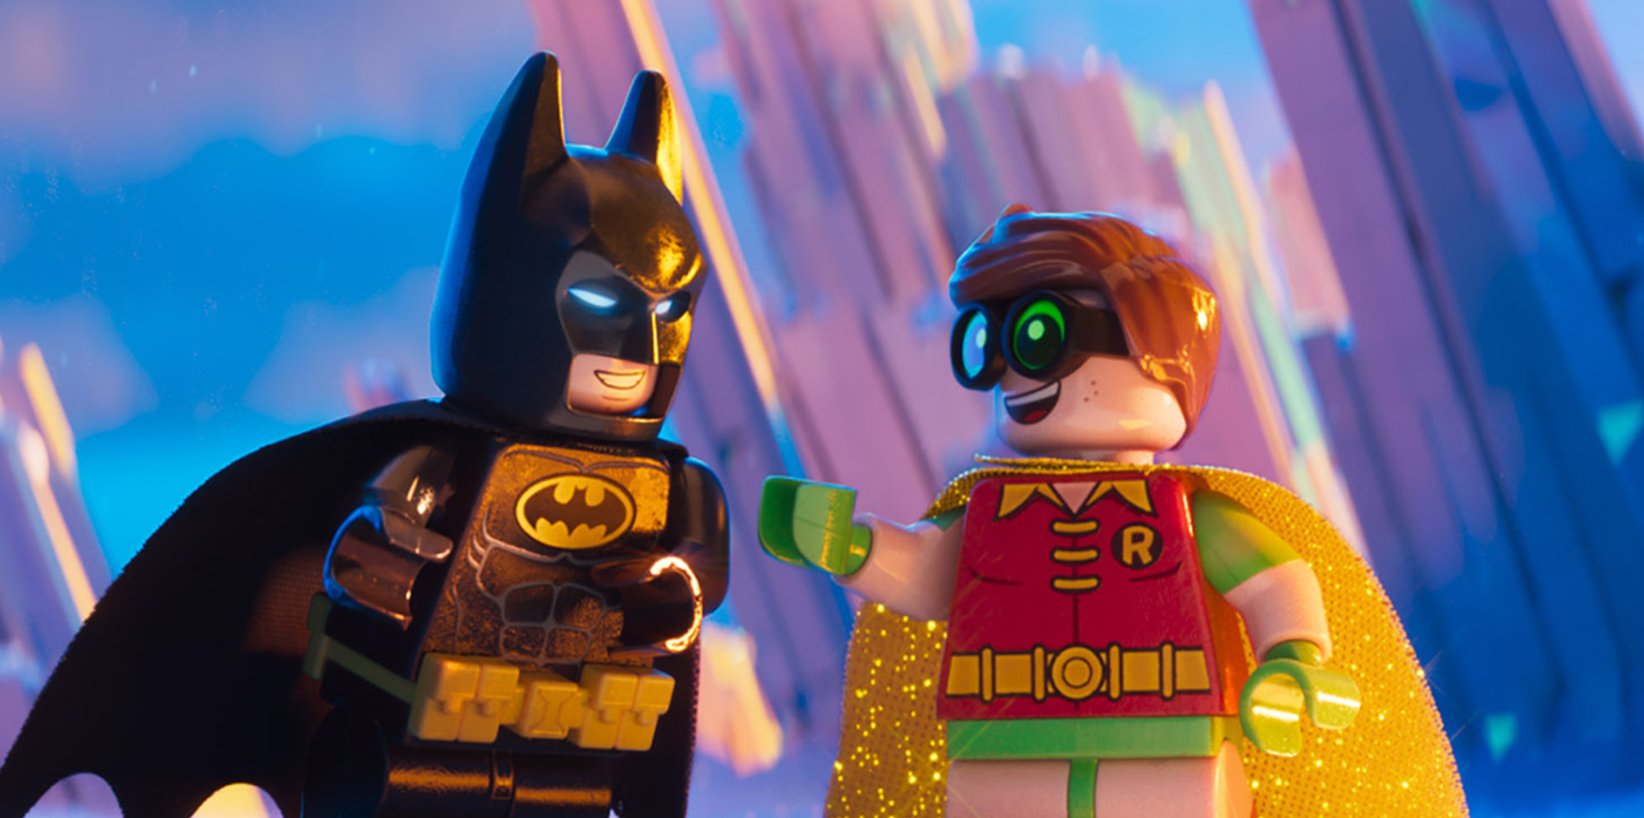 Lykkelig i mellemtiden Baglæns Gizmodo on Twitter: "On The Lego Batman Movie, the Muslim Ban and becoming  a family https://t.co/jPeCRozANa https://t.co/hAWudUyLWZ" / Twitter